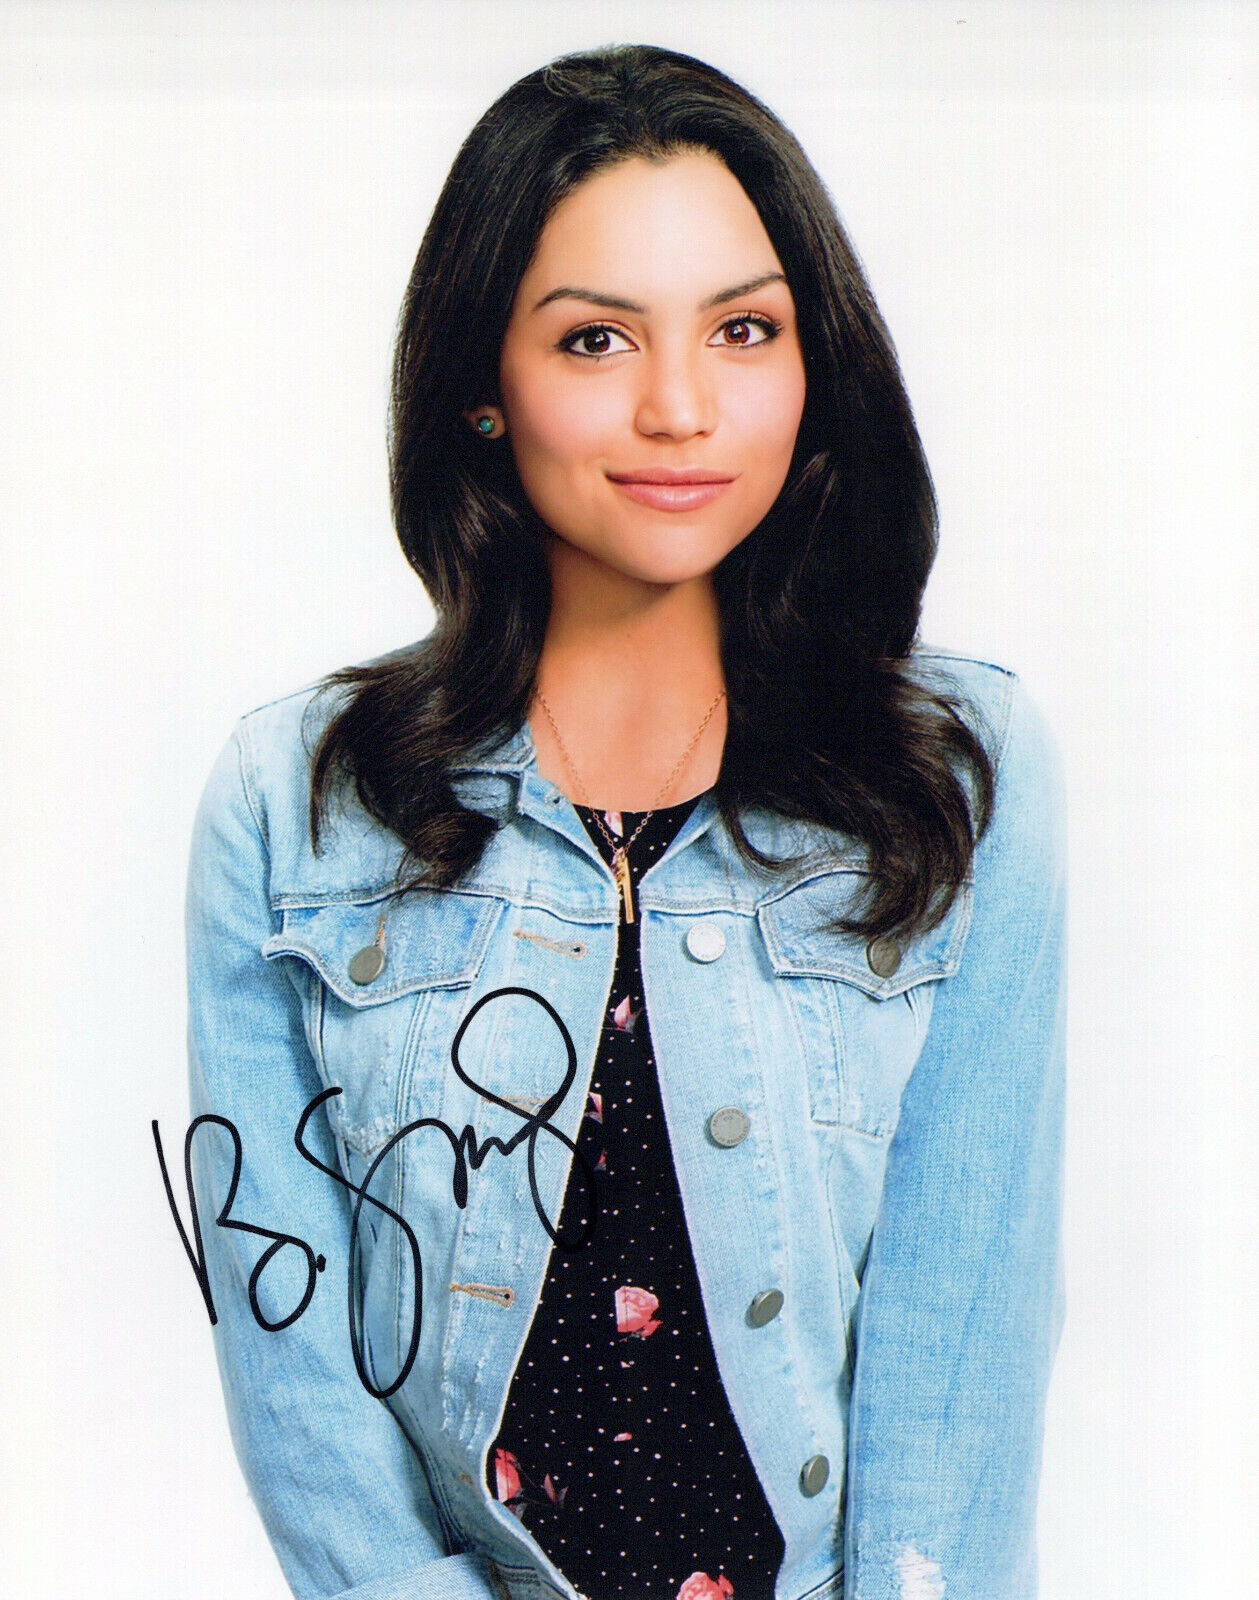 Bianca Santos glamour shot autographed Photo Poster painting signed 8x10 #5